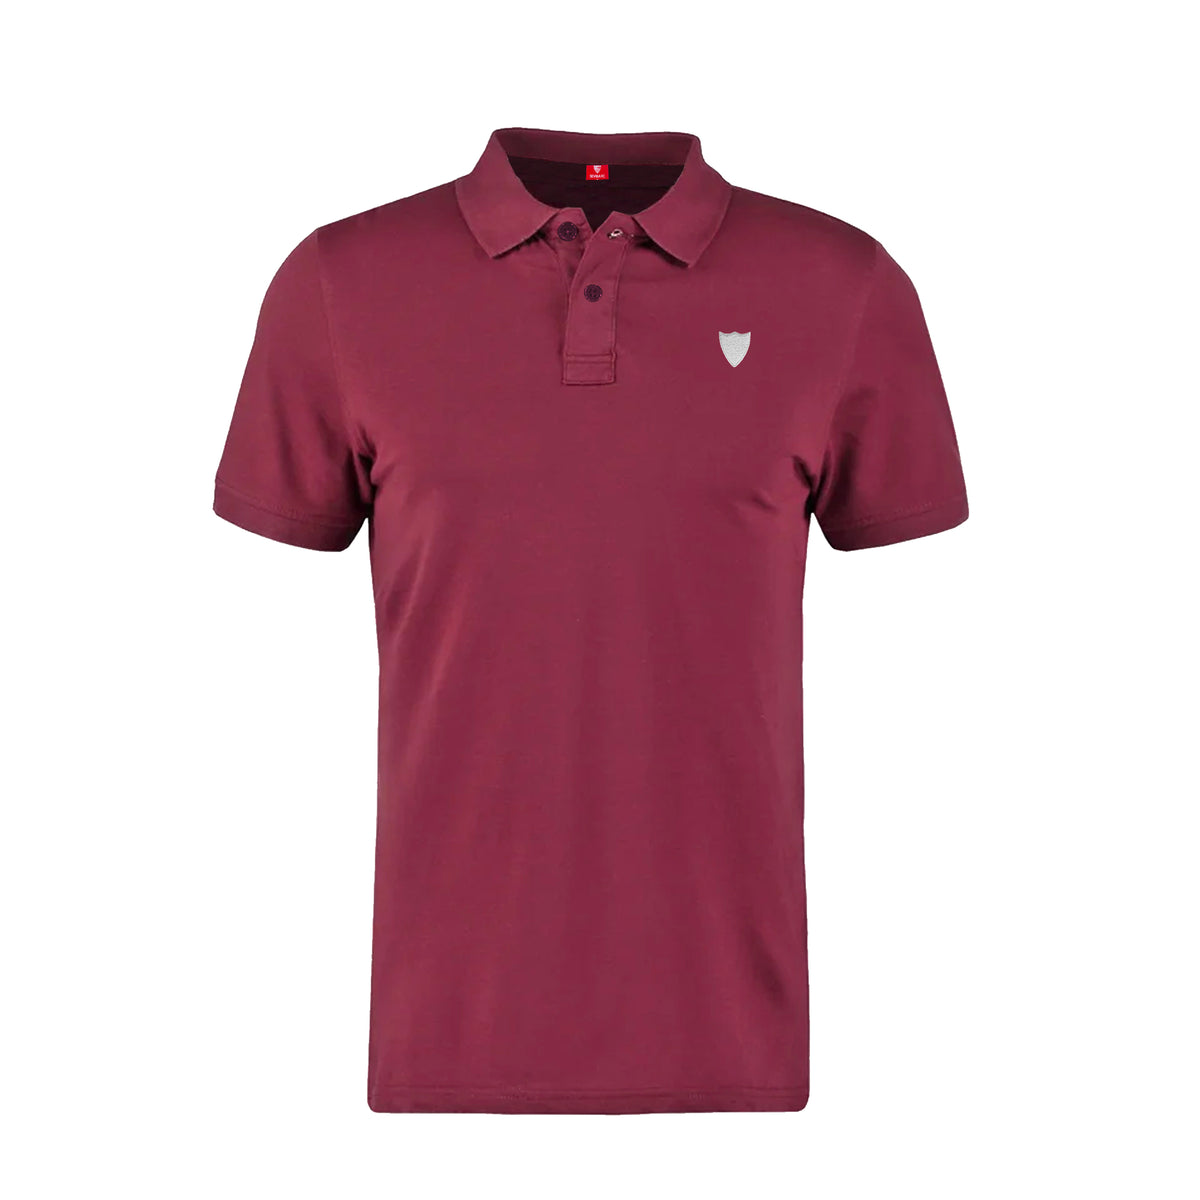 Adult Burgundy Polo With Crest 23/24